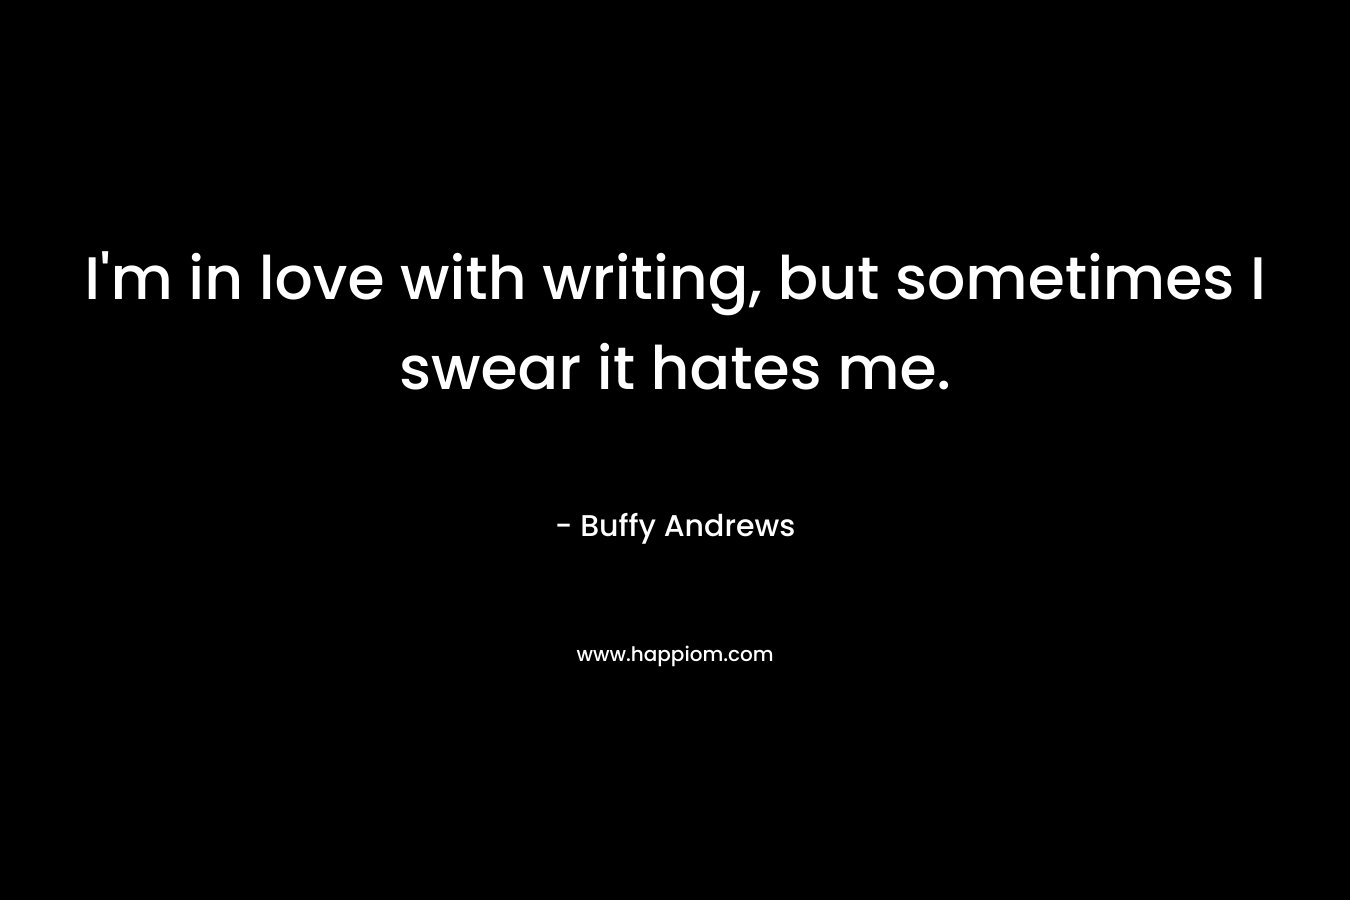 I'm in love with writing, but sometimes I swear it hates me.